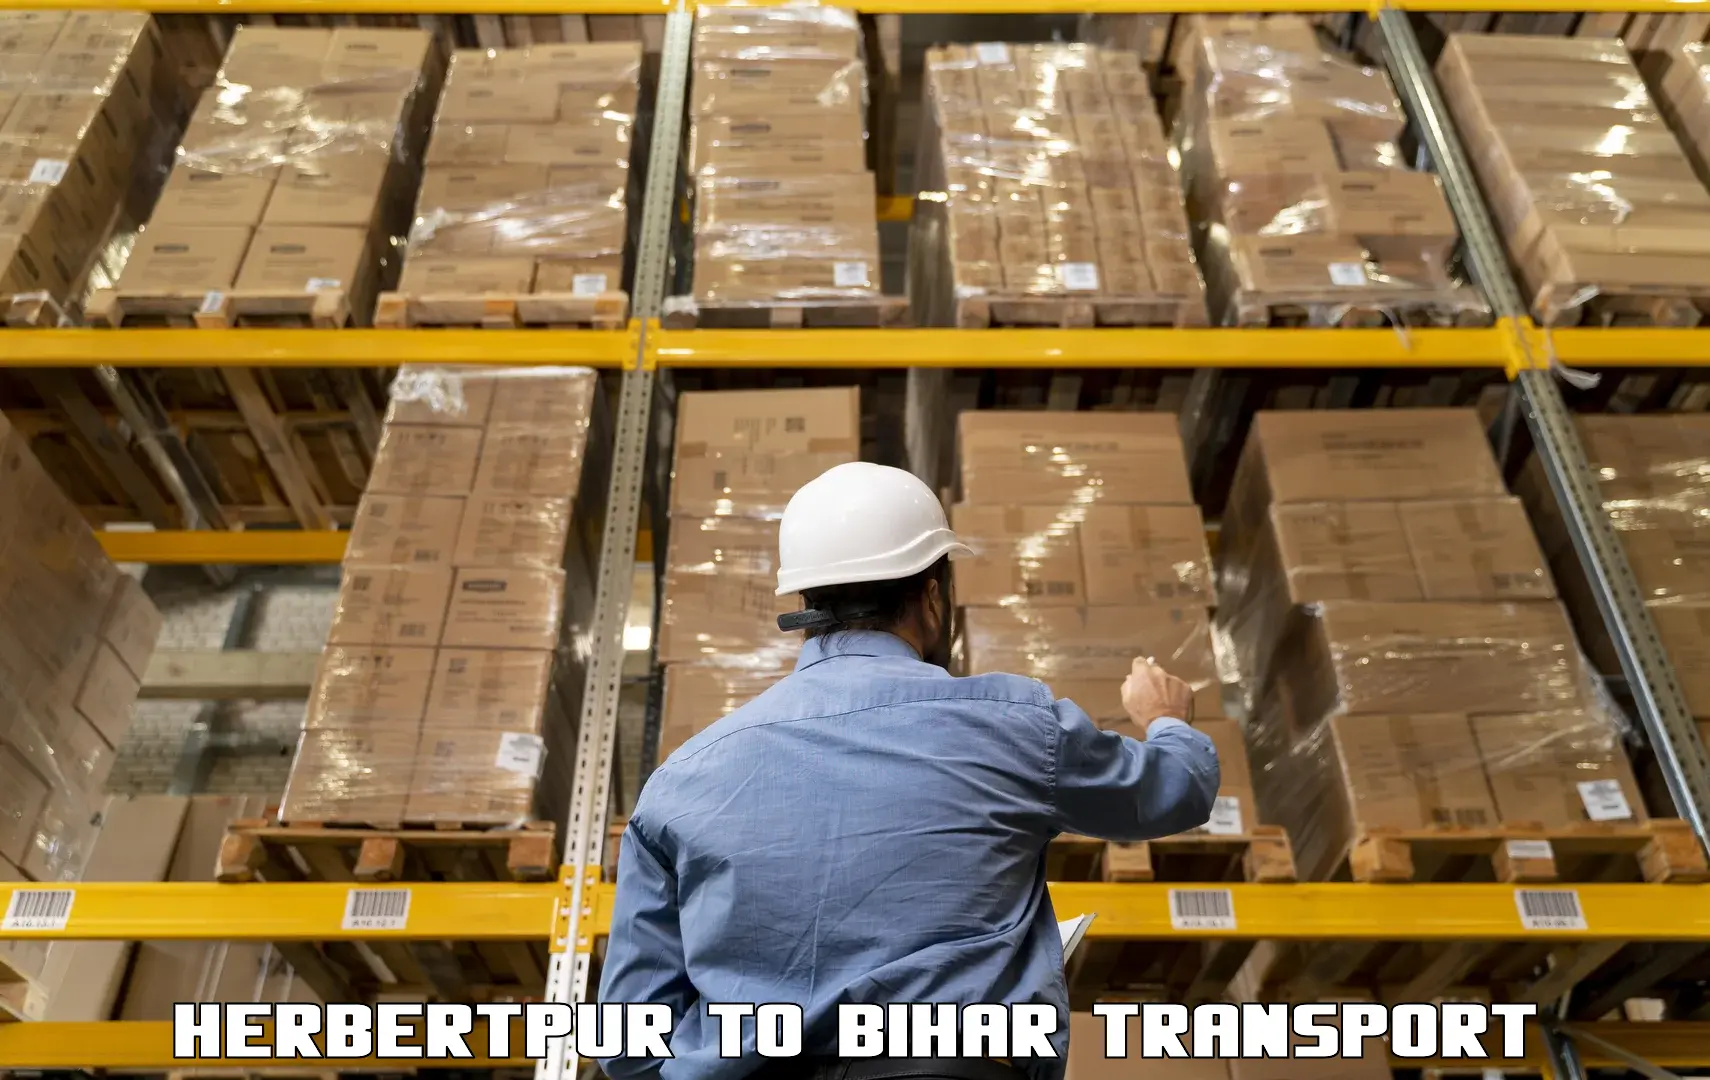 Air freight transport services Herbertpur to Dhaka